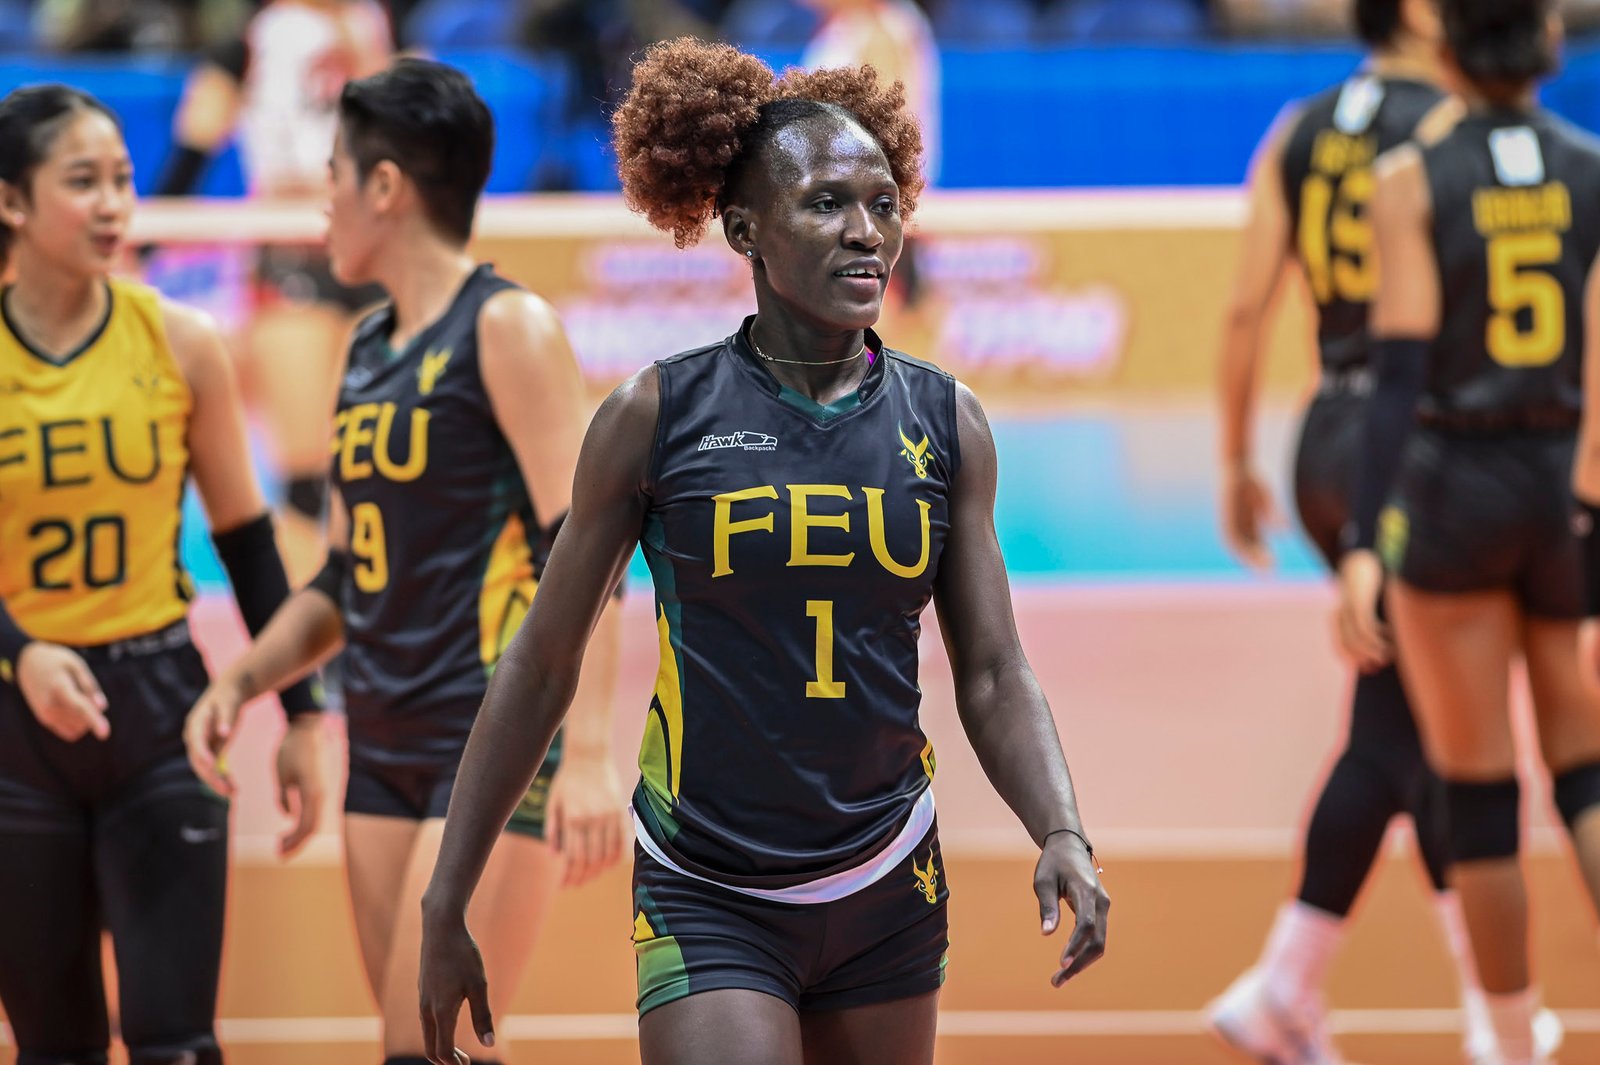 Bakanke lets her game do the talking as FEU gets ready for NU showdown and Final Four